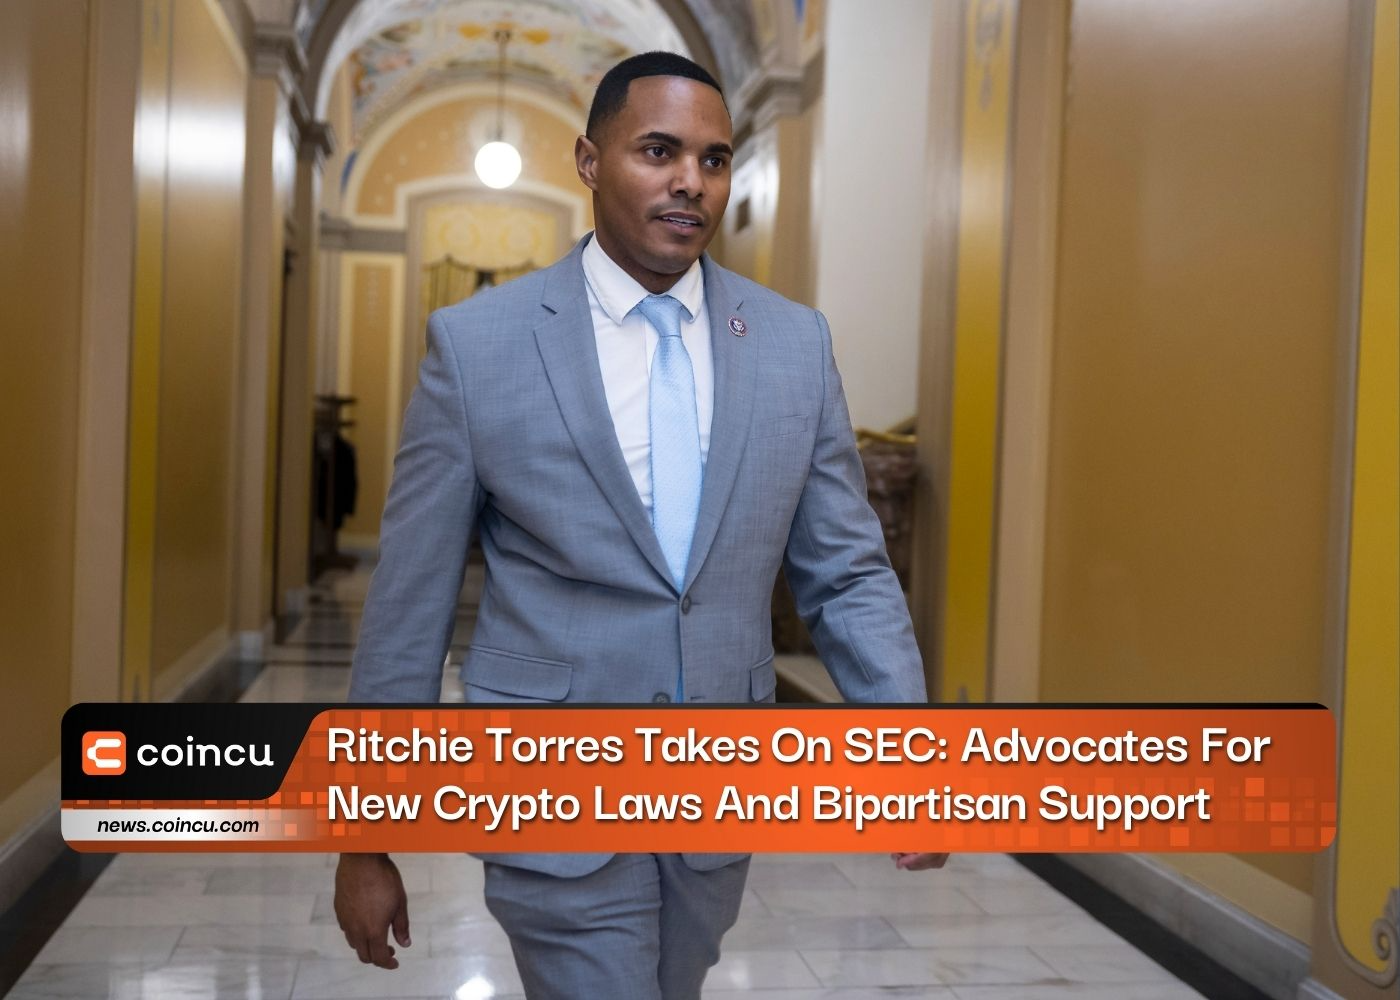 Ritchie Torres Takes On SEC: Advocates For New Crypto Laws And Bipartisan Support